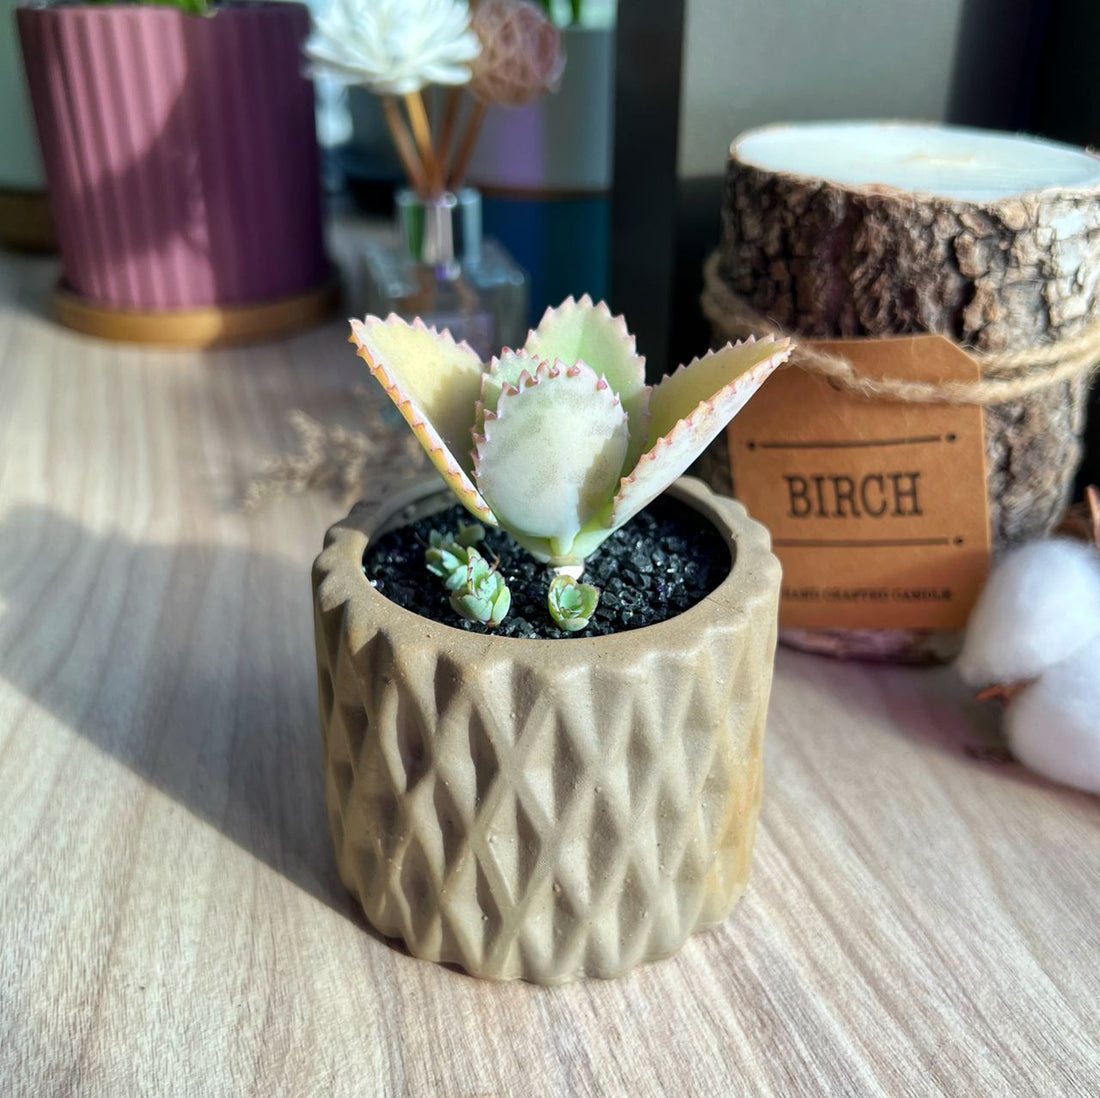 What pot size should we use for succulent?